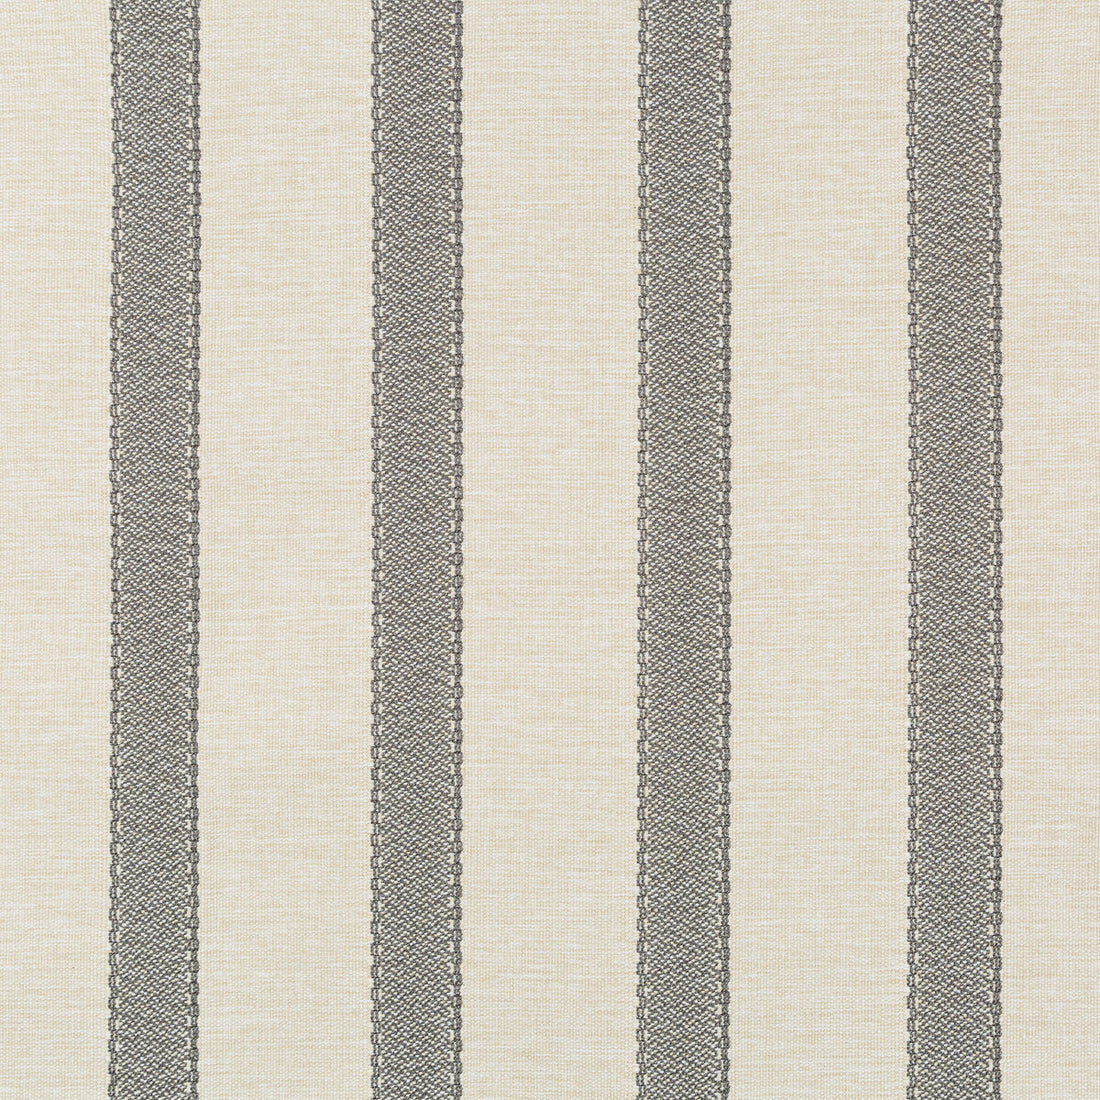 Skysail fabric in graphite color - pattern 35535.1611.0 - by Kravet Couture in the Vista collection